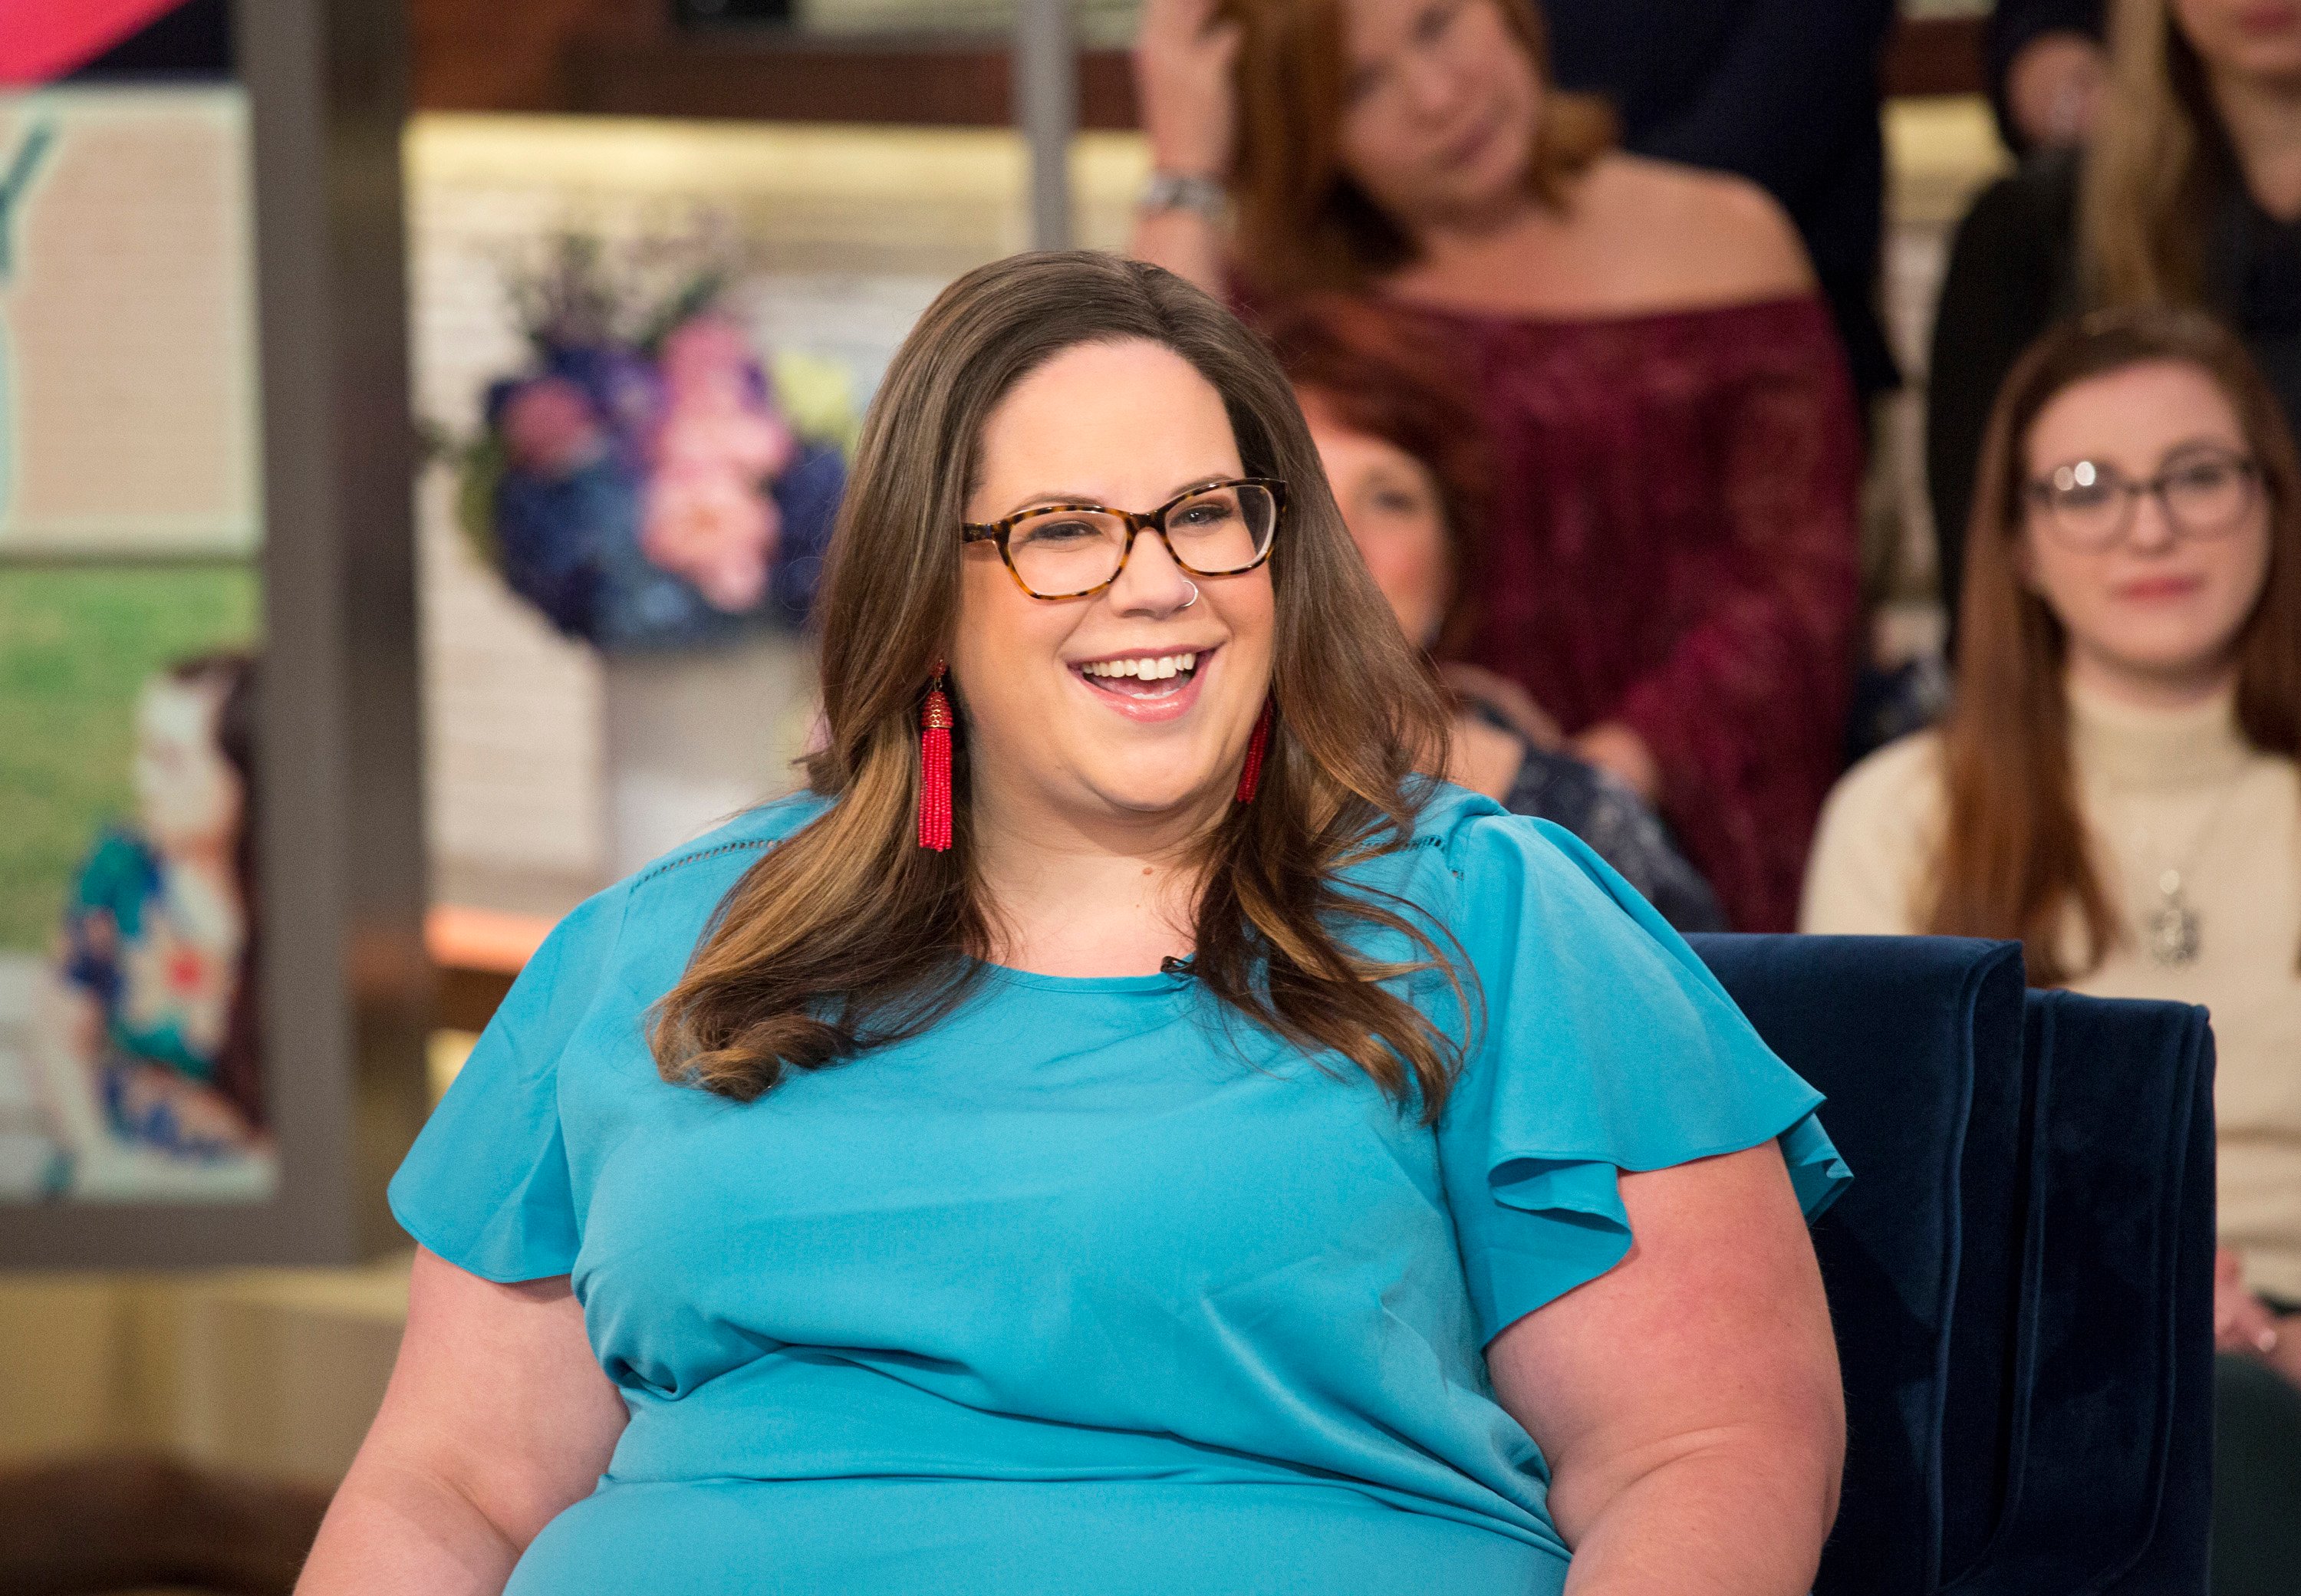 'My Big Fat Fabulous Life' star Whitney Thore wearing a blue blouse, red earrings, and glasses during a talk show appearance.